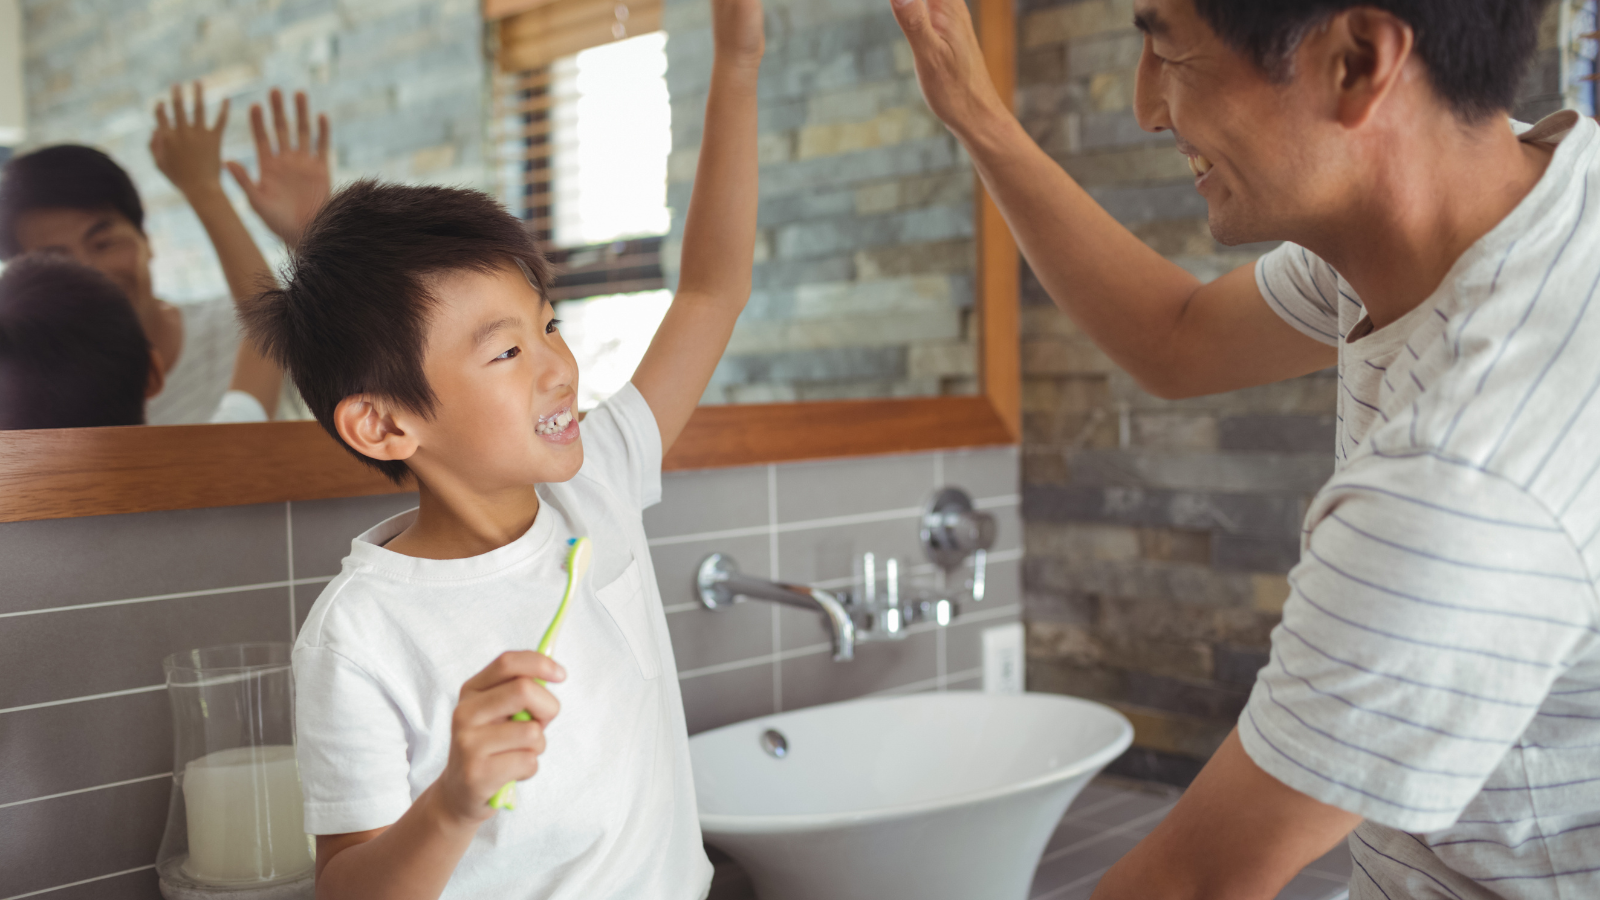 Dad high fiving his son for brushing his teeth.